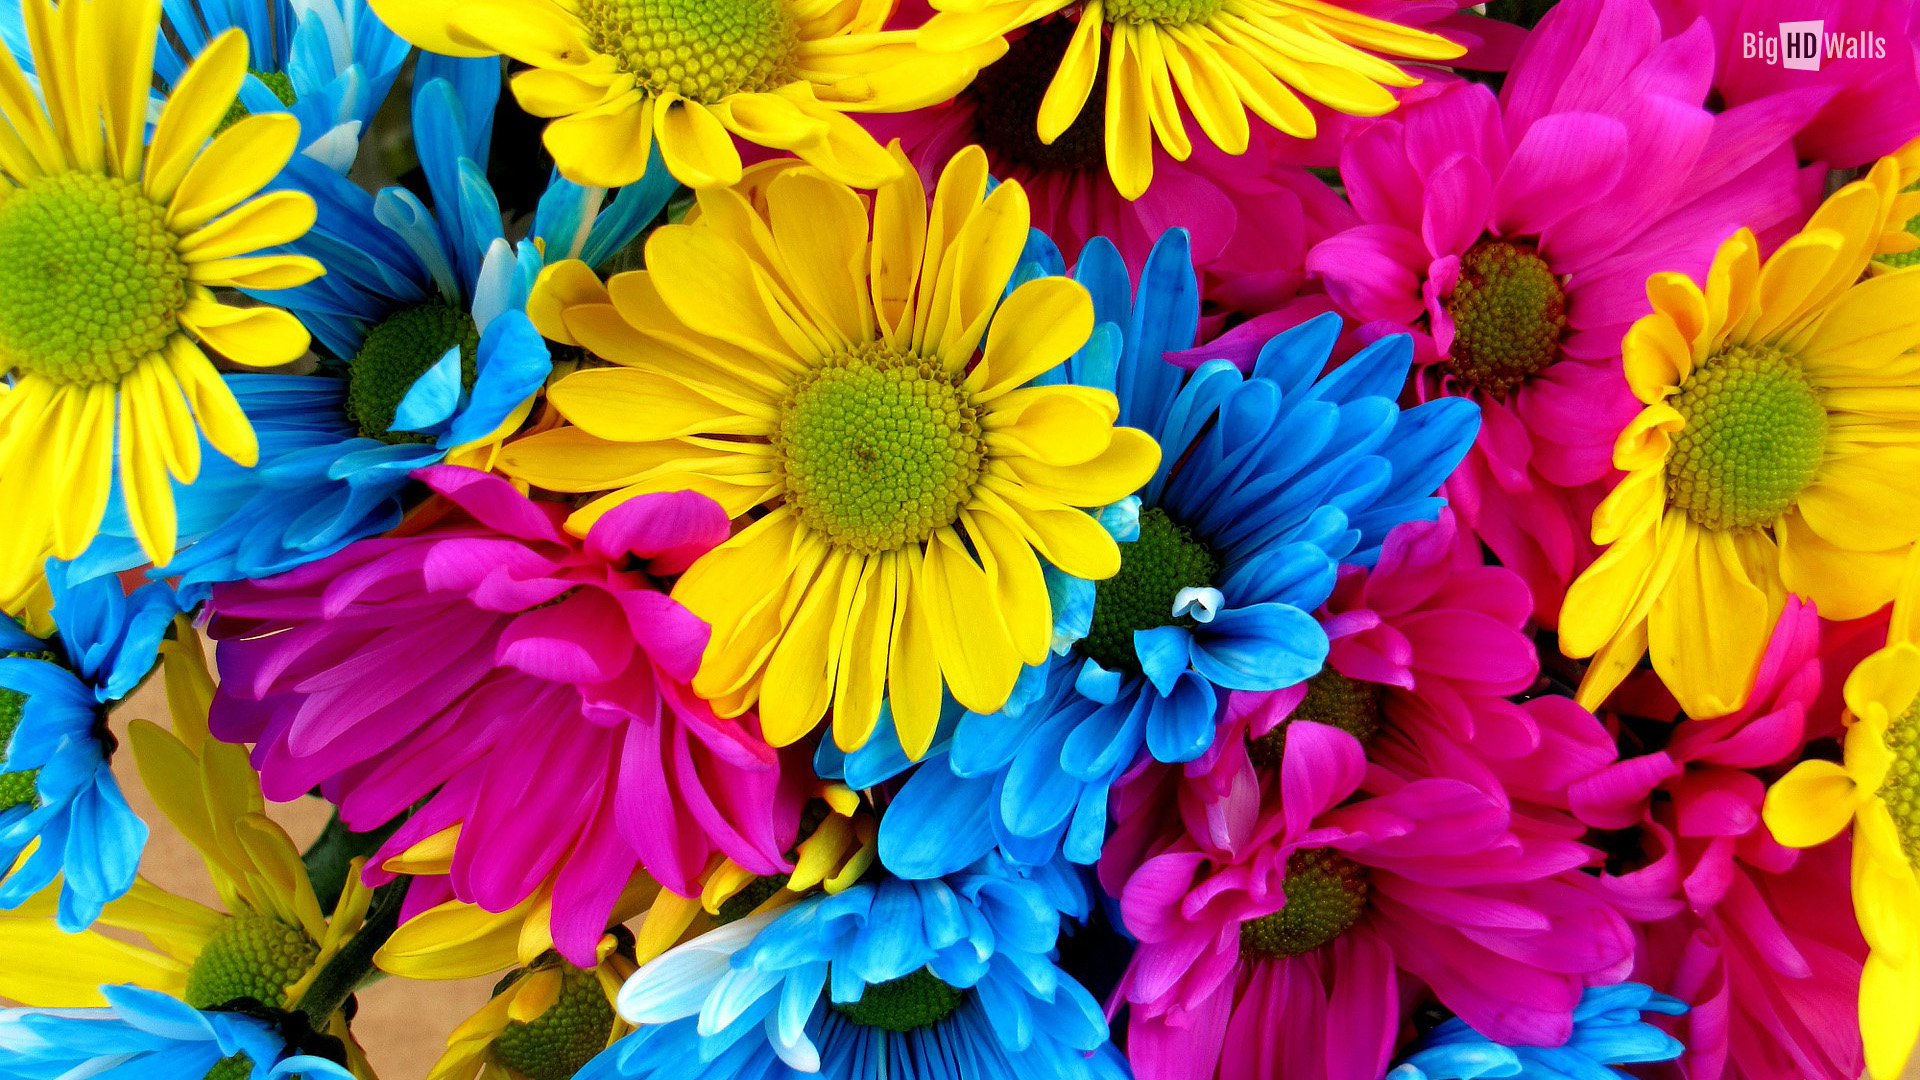 Colorful Daisy Flower Wallpaper Ing Gallery